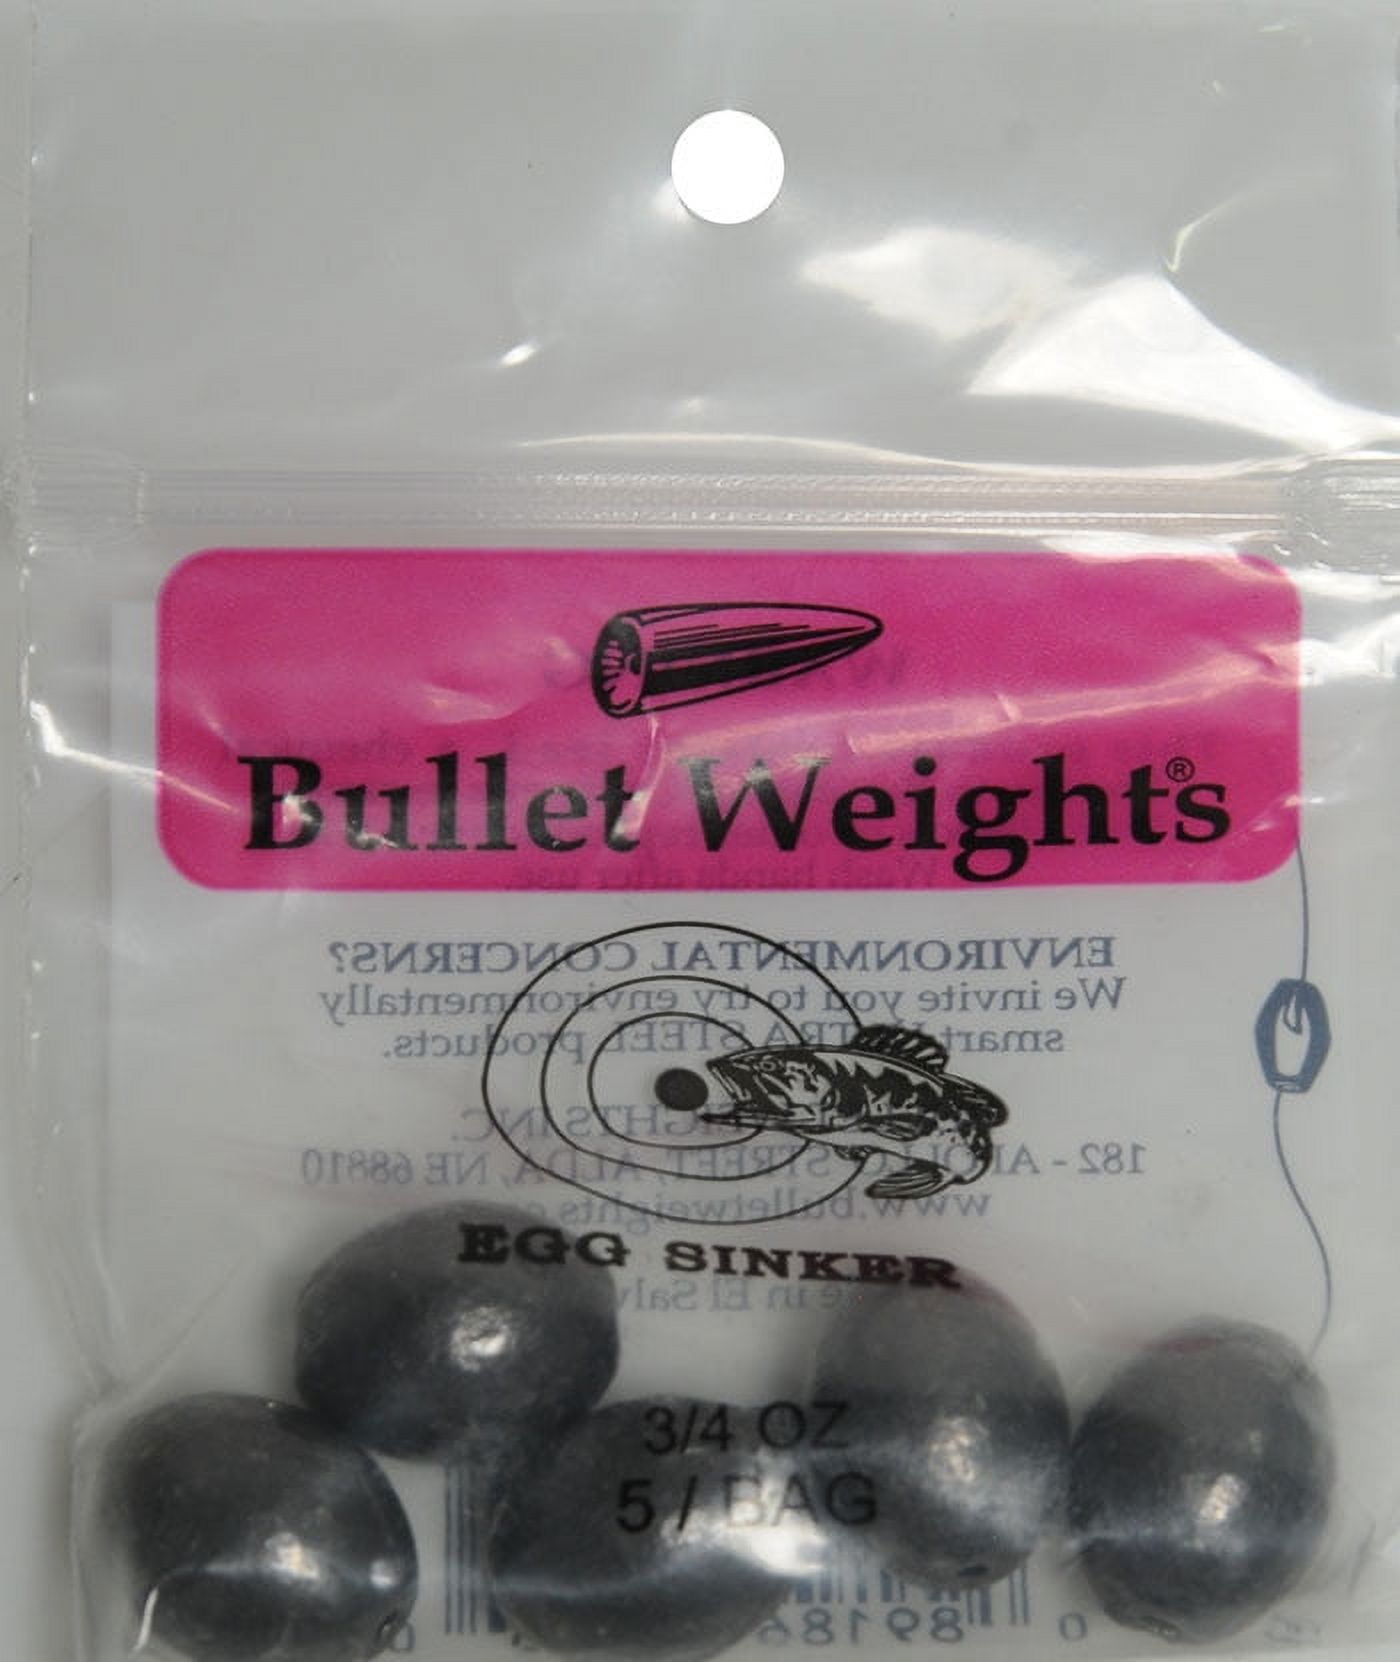 Bullet Weights® EG6-24 Lead Egg Sinker Size 3/4 oz Fishing Weights 